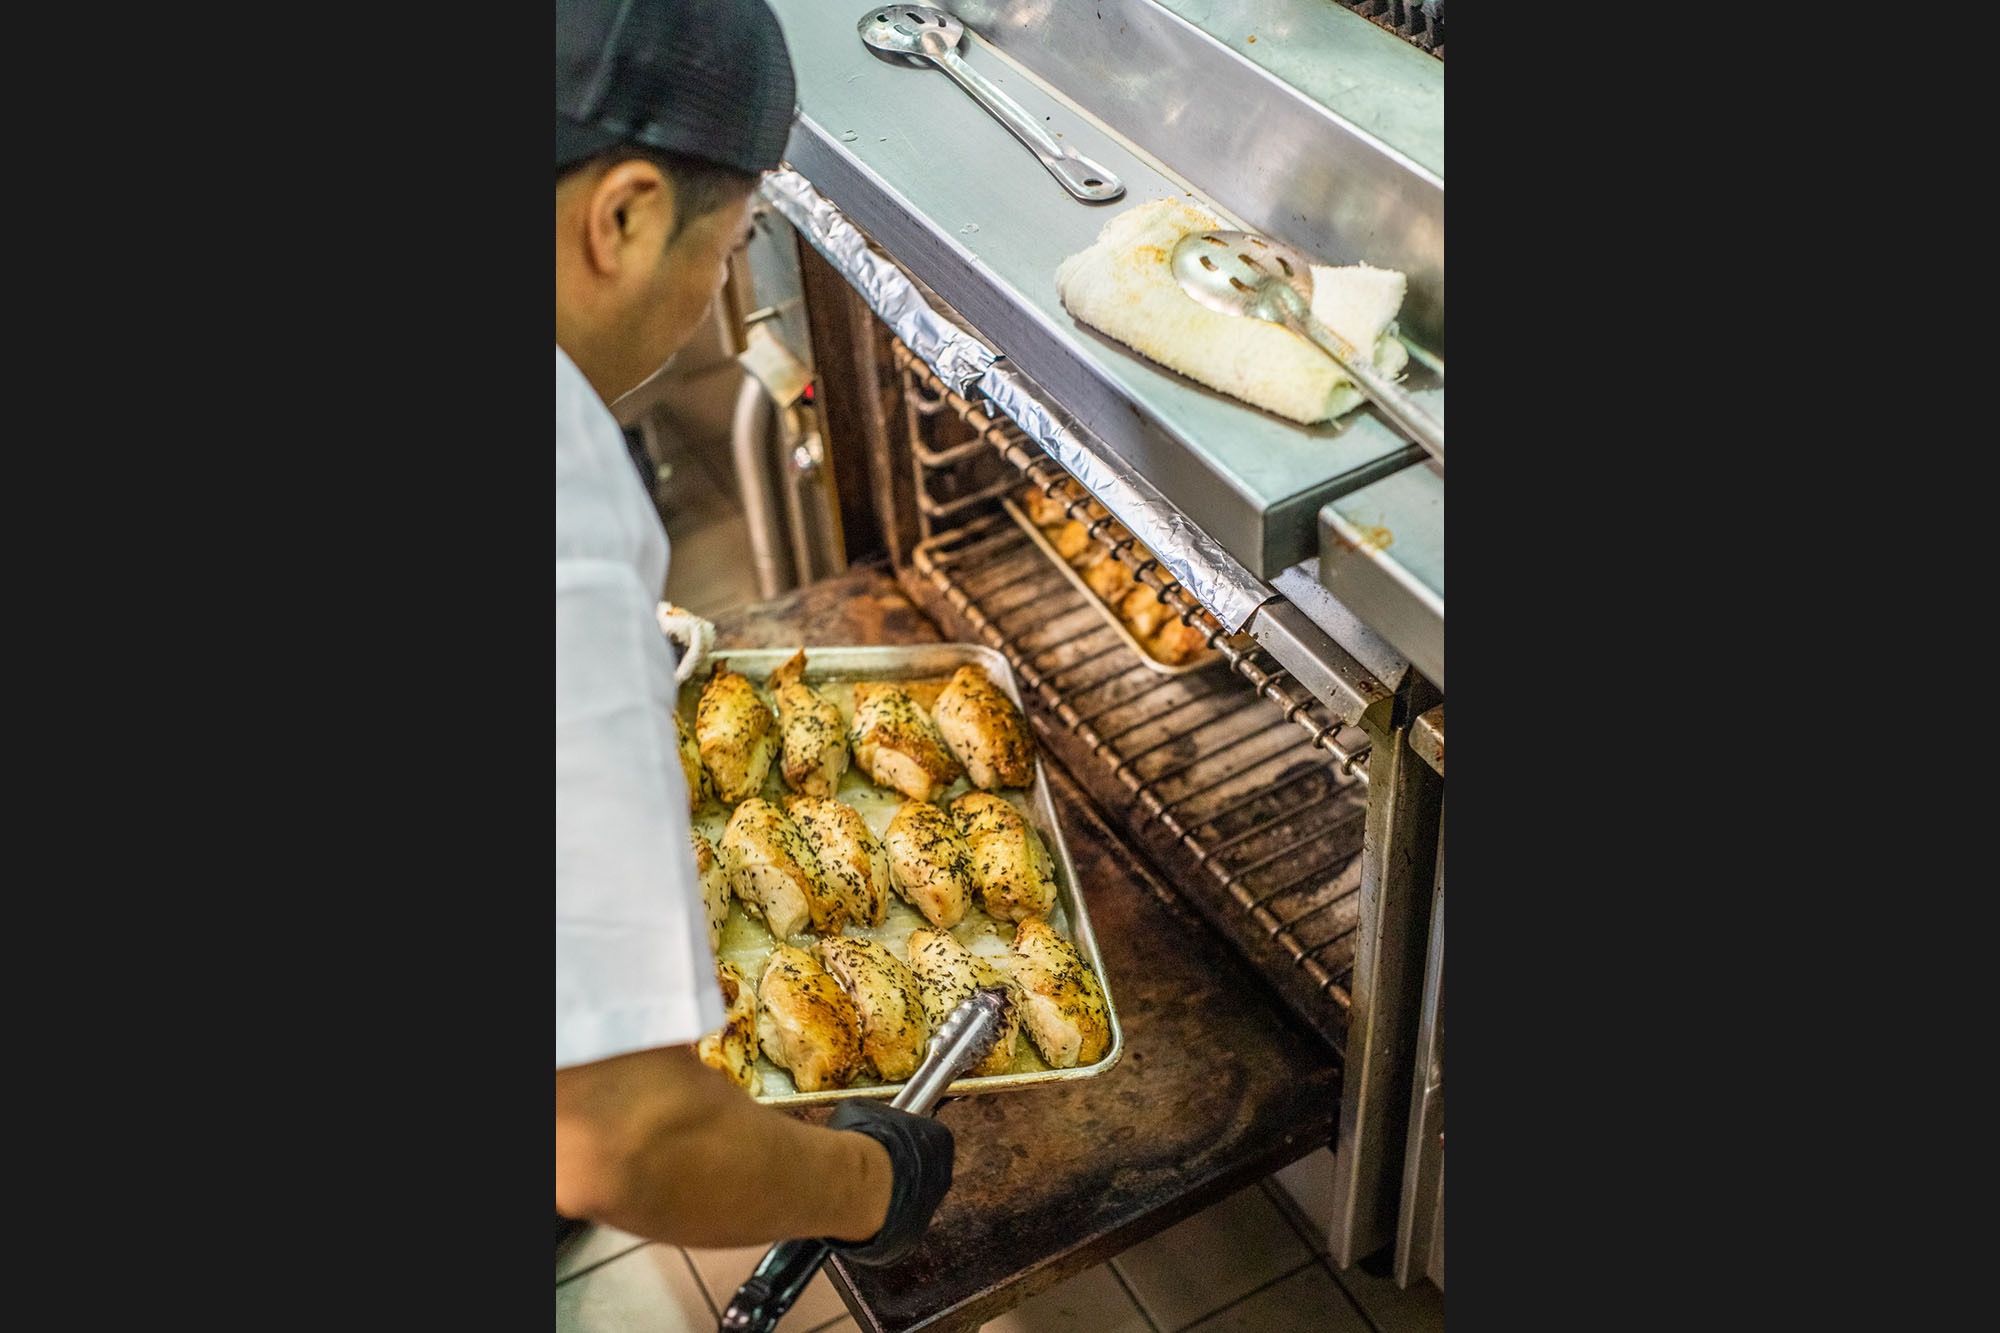 A chef loading a pan of chicken into the oven at Mulberry & Vine.